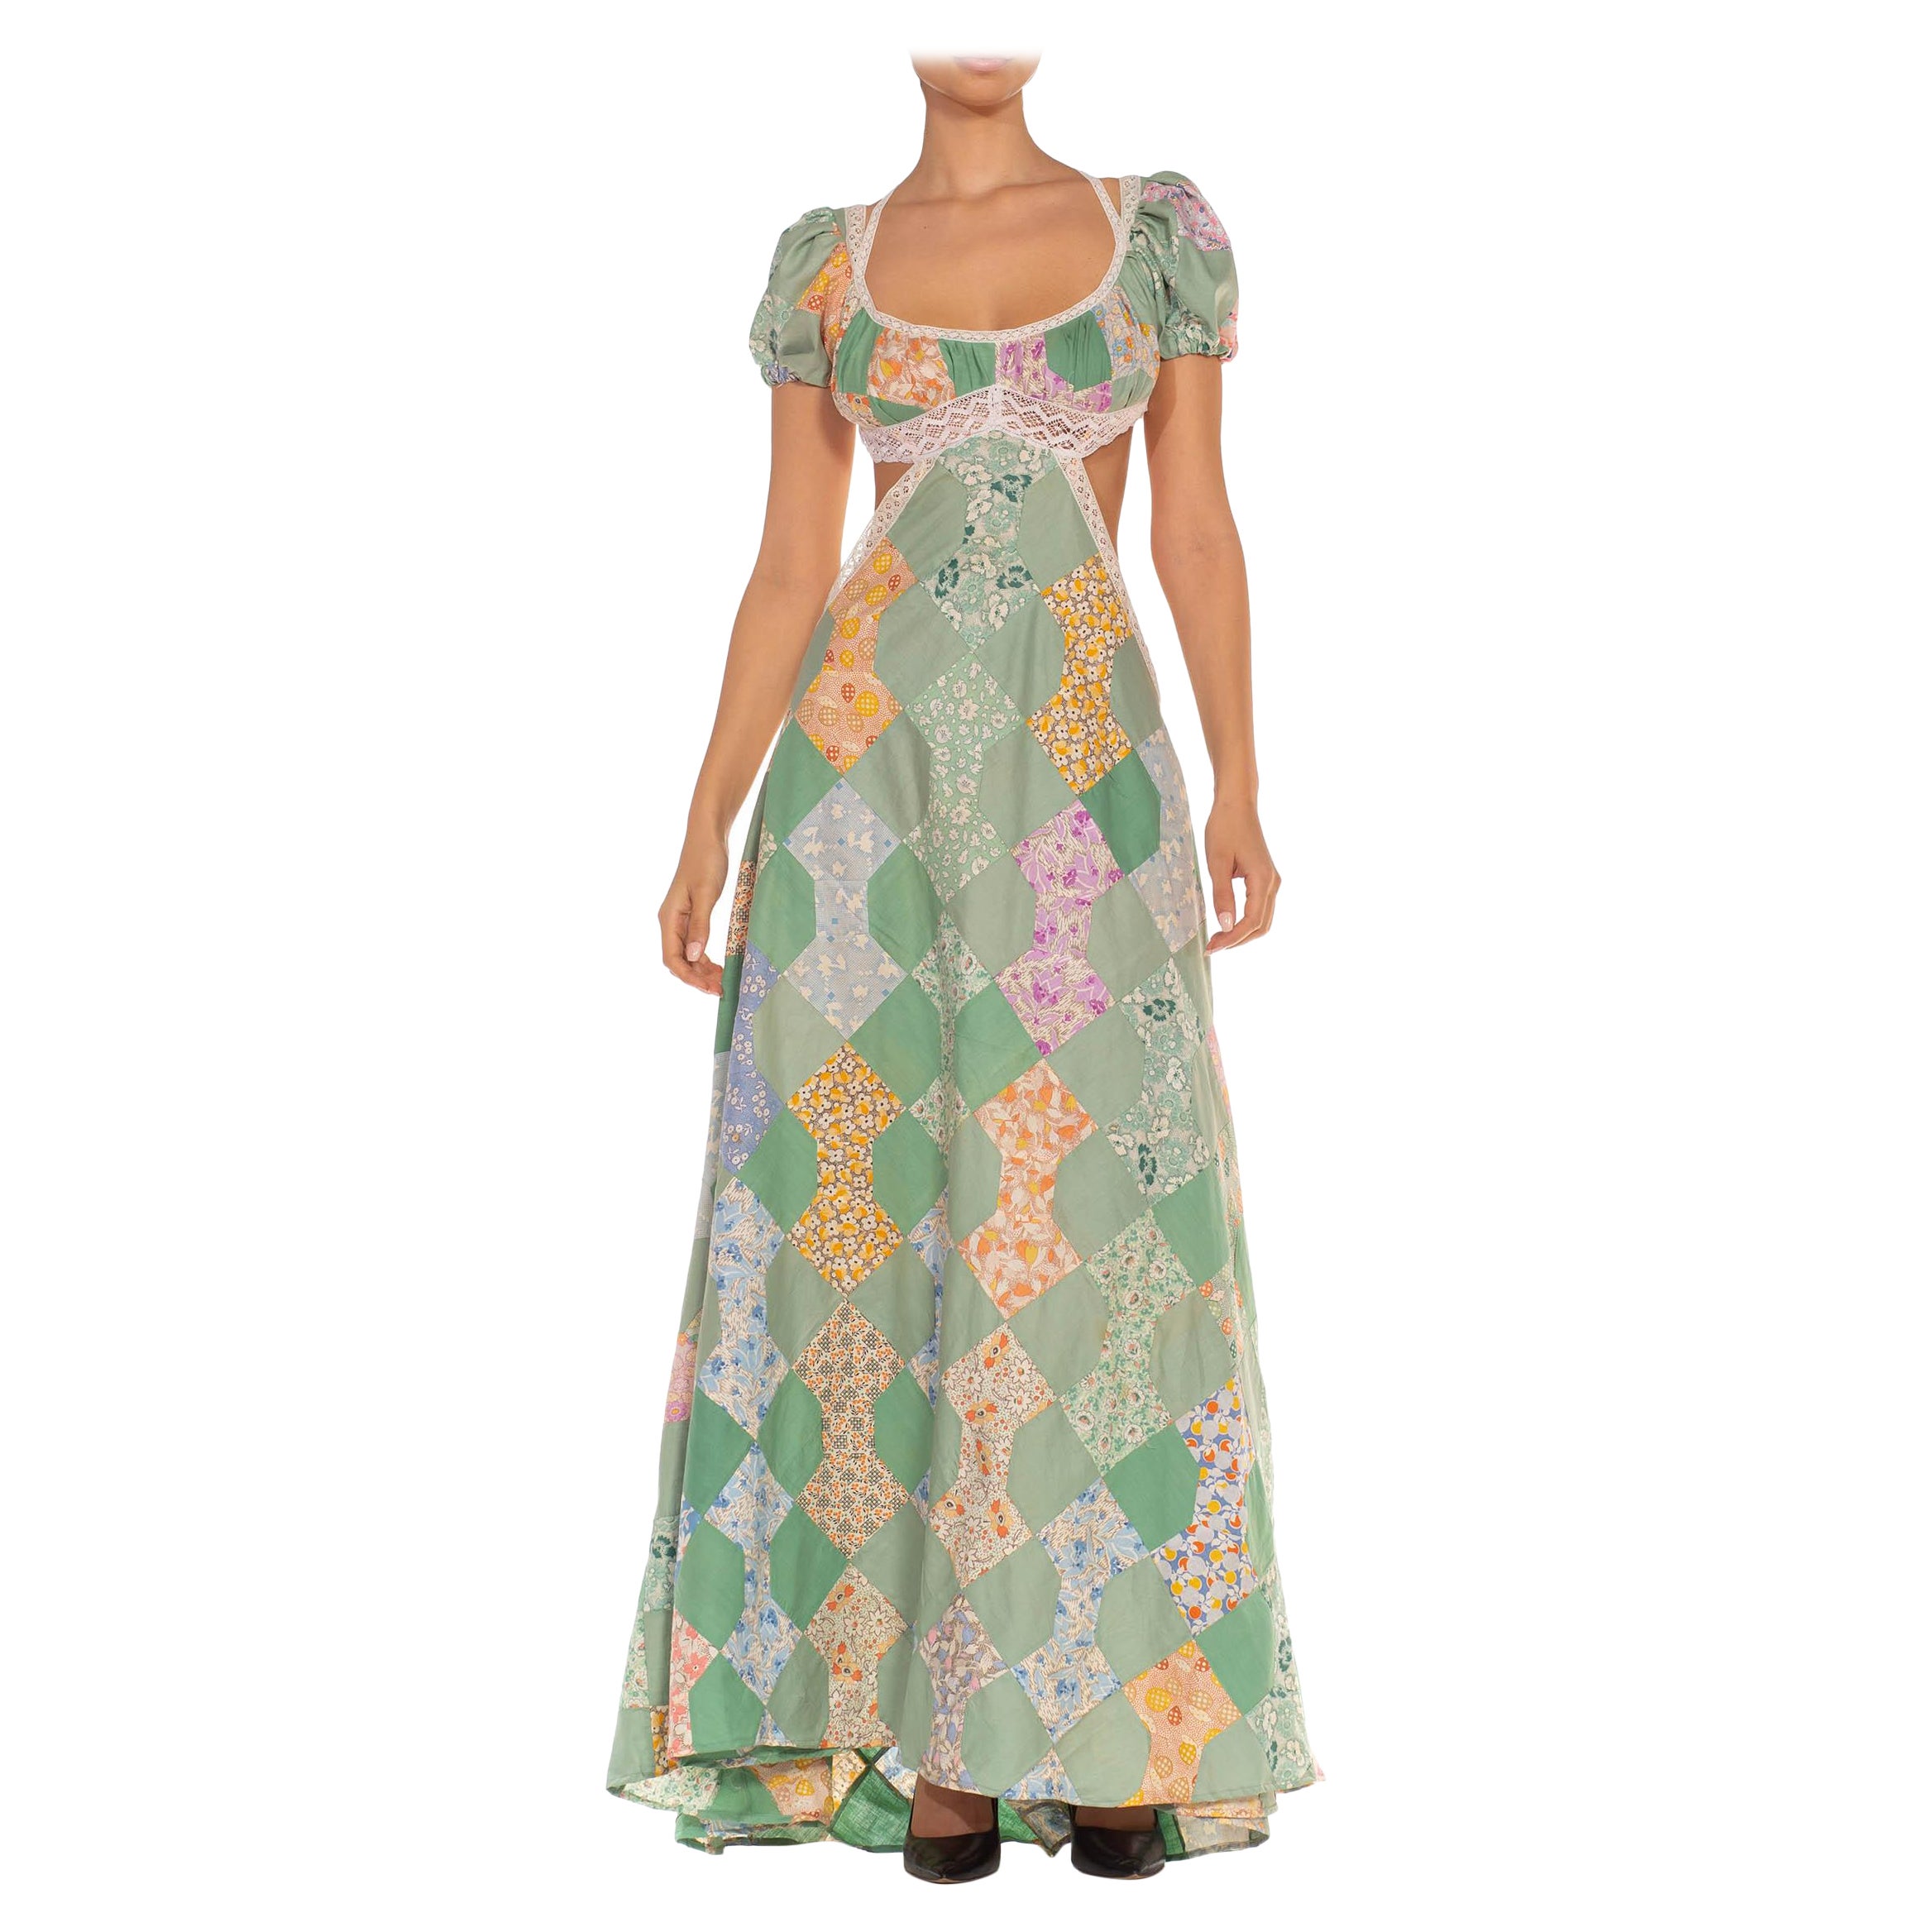 Morphew Collection Green & Orange Organic Cotton Victorian Lace Trim Gown Made  For Sale